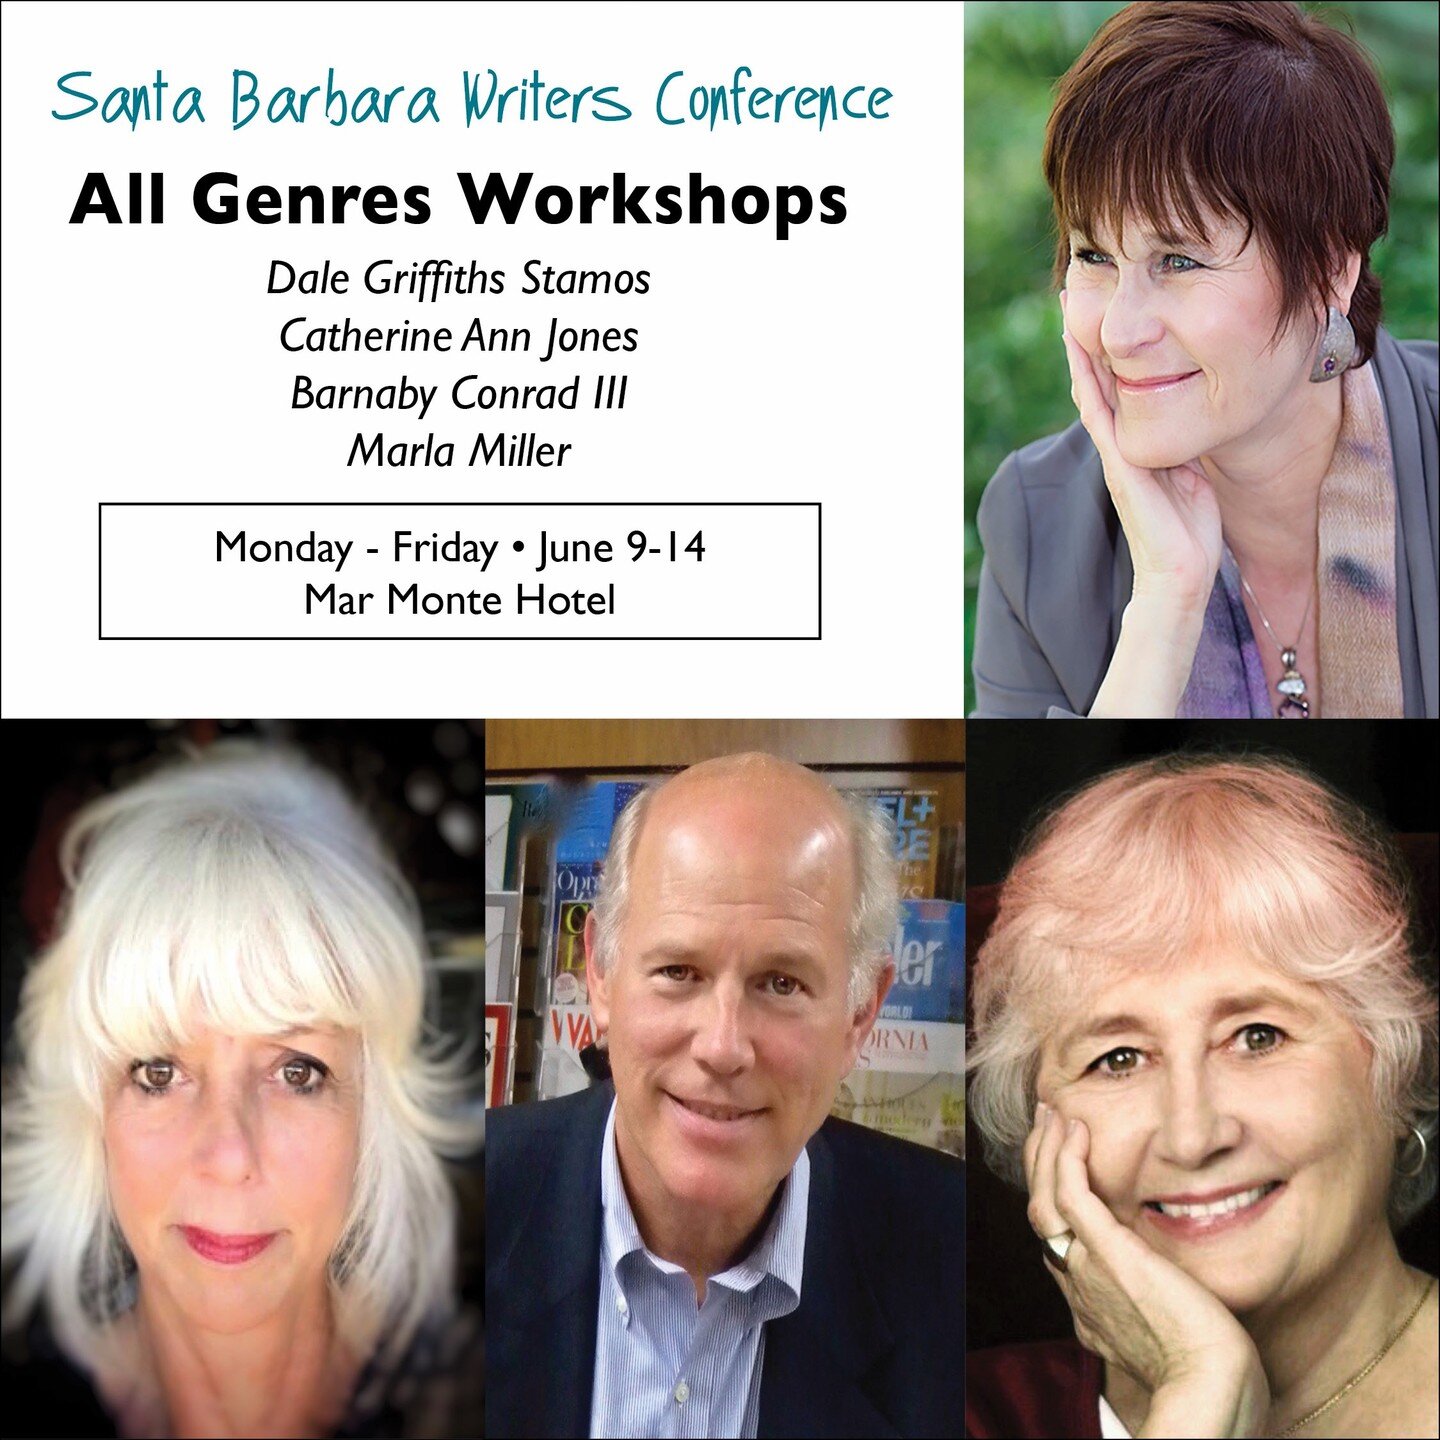 This four workshop leaders cover differing aspects of writing in all genres, structure, story, beginnings and marketability.